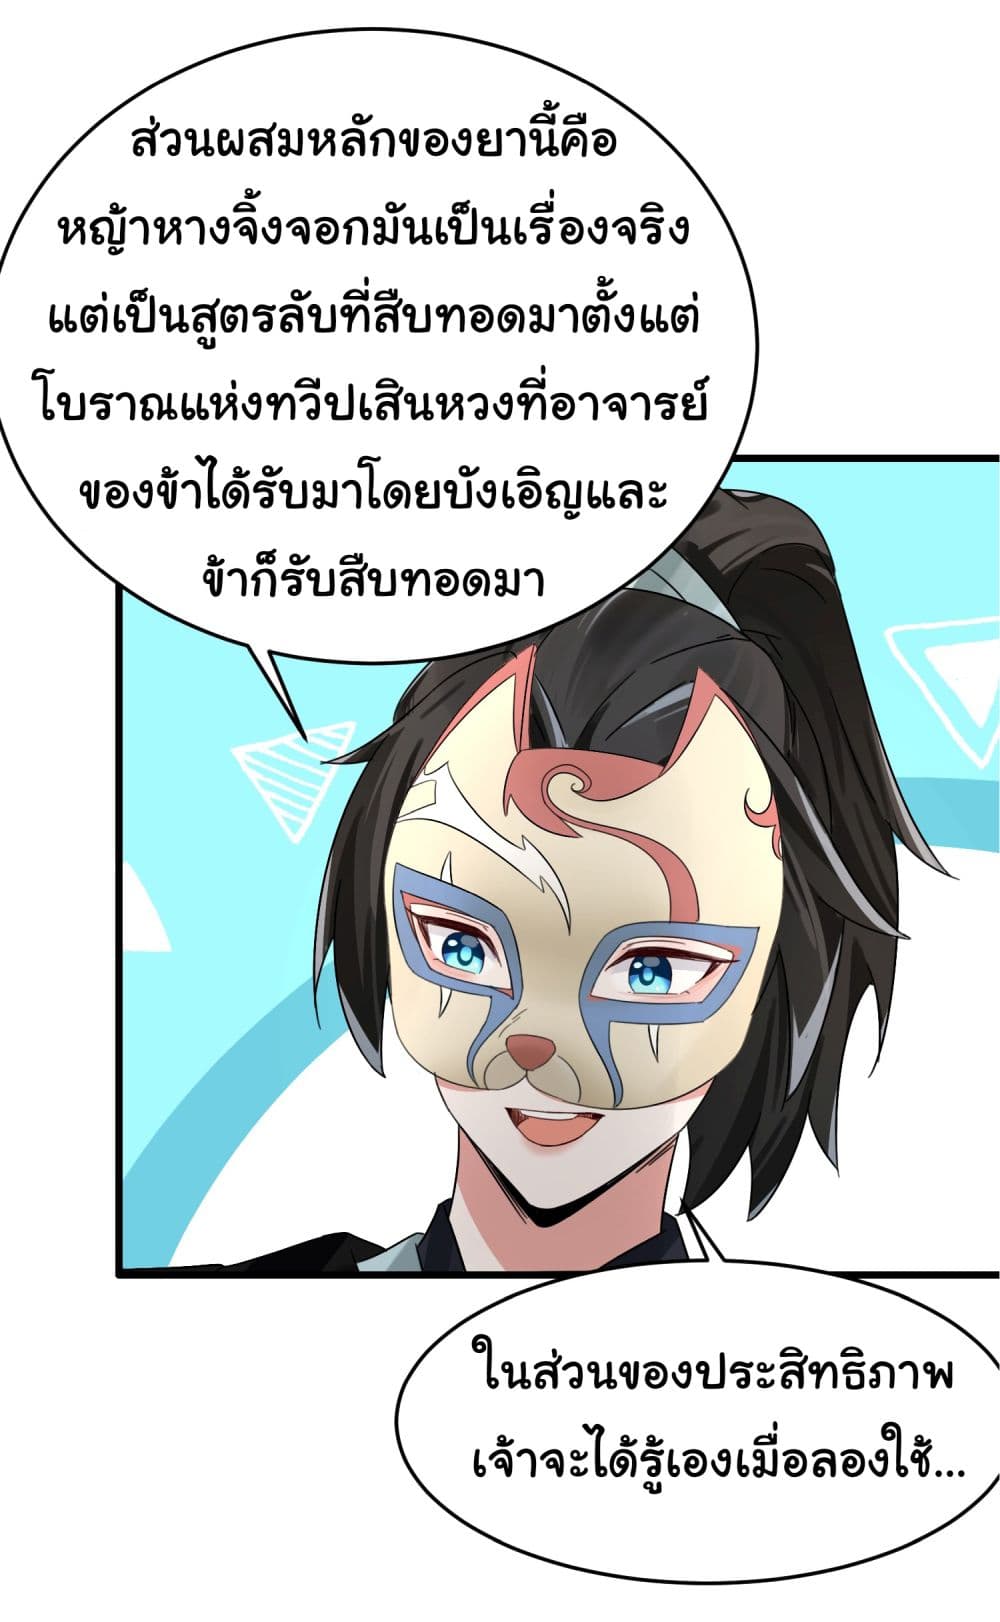 Rebirth of an Immortal Cultivator from 10,000 years ago ตอนที่ 5 (14)